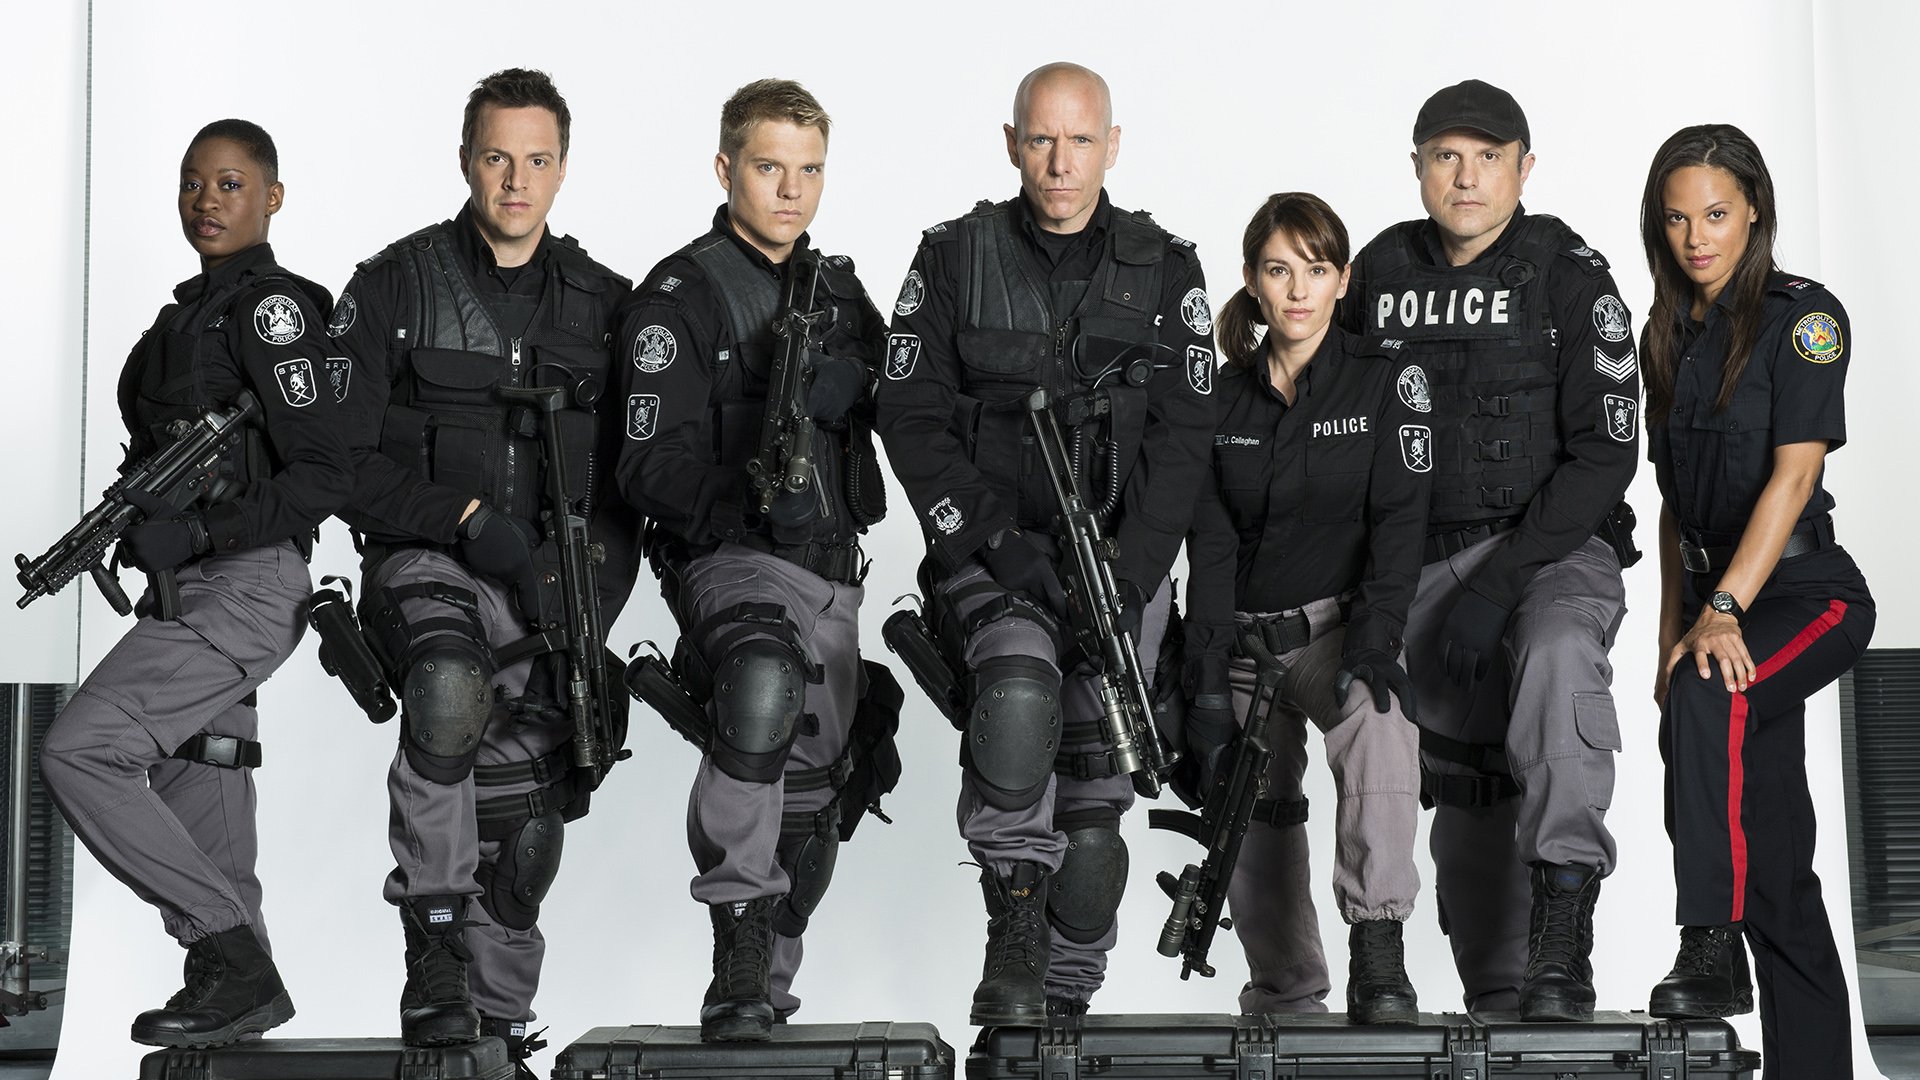 flashpoint, Action, Crime, Drama, Series,  48 Wallpaper